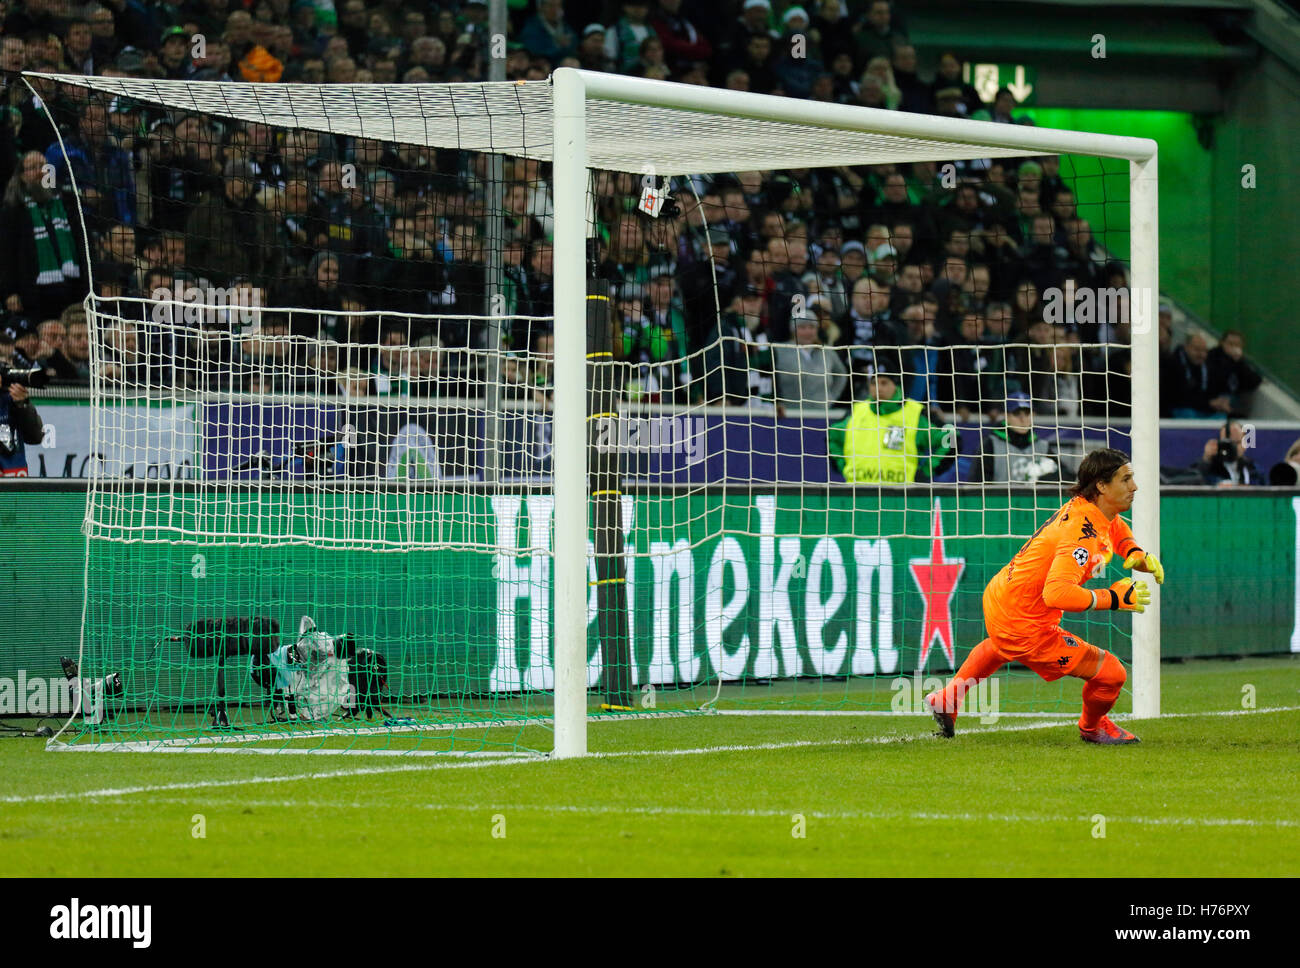 sports, football, UEFA Champions League, 2016/2017, Group Stage, Group C, Matchday 4, Borussia Moenchengladbach versus Celtic FC Glasgow 1:1, Stadium Borussia Park, Moussa Dembele (Celtic) not pictured was fouled in the box, he himself converts the penalty kick to the Celtic 1:1 equalizer, keeper Yann Sommer (MG) is chanceless Stock Photo